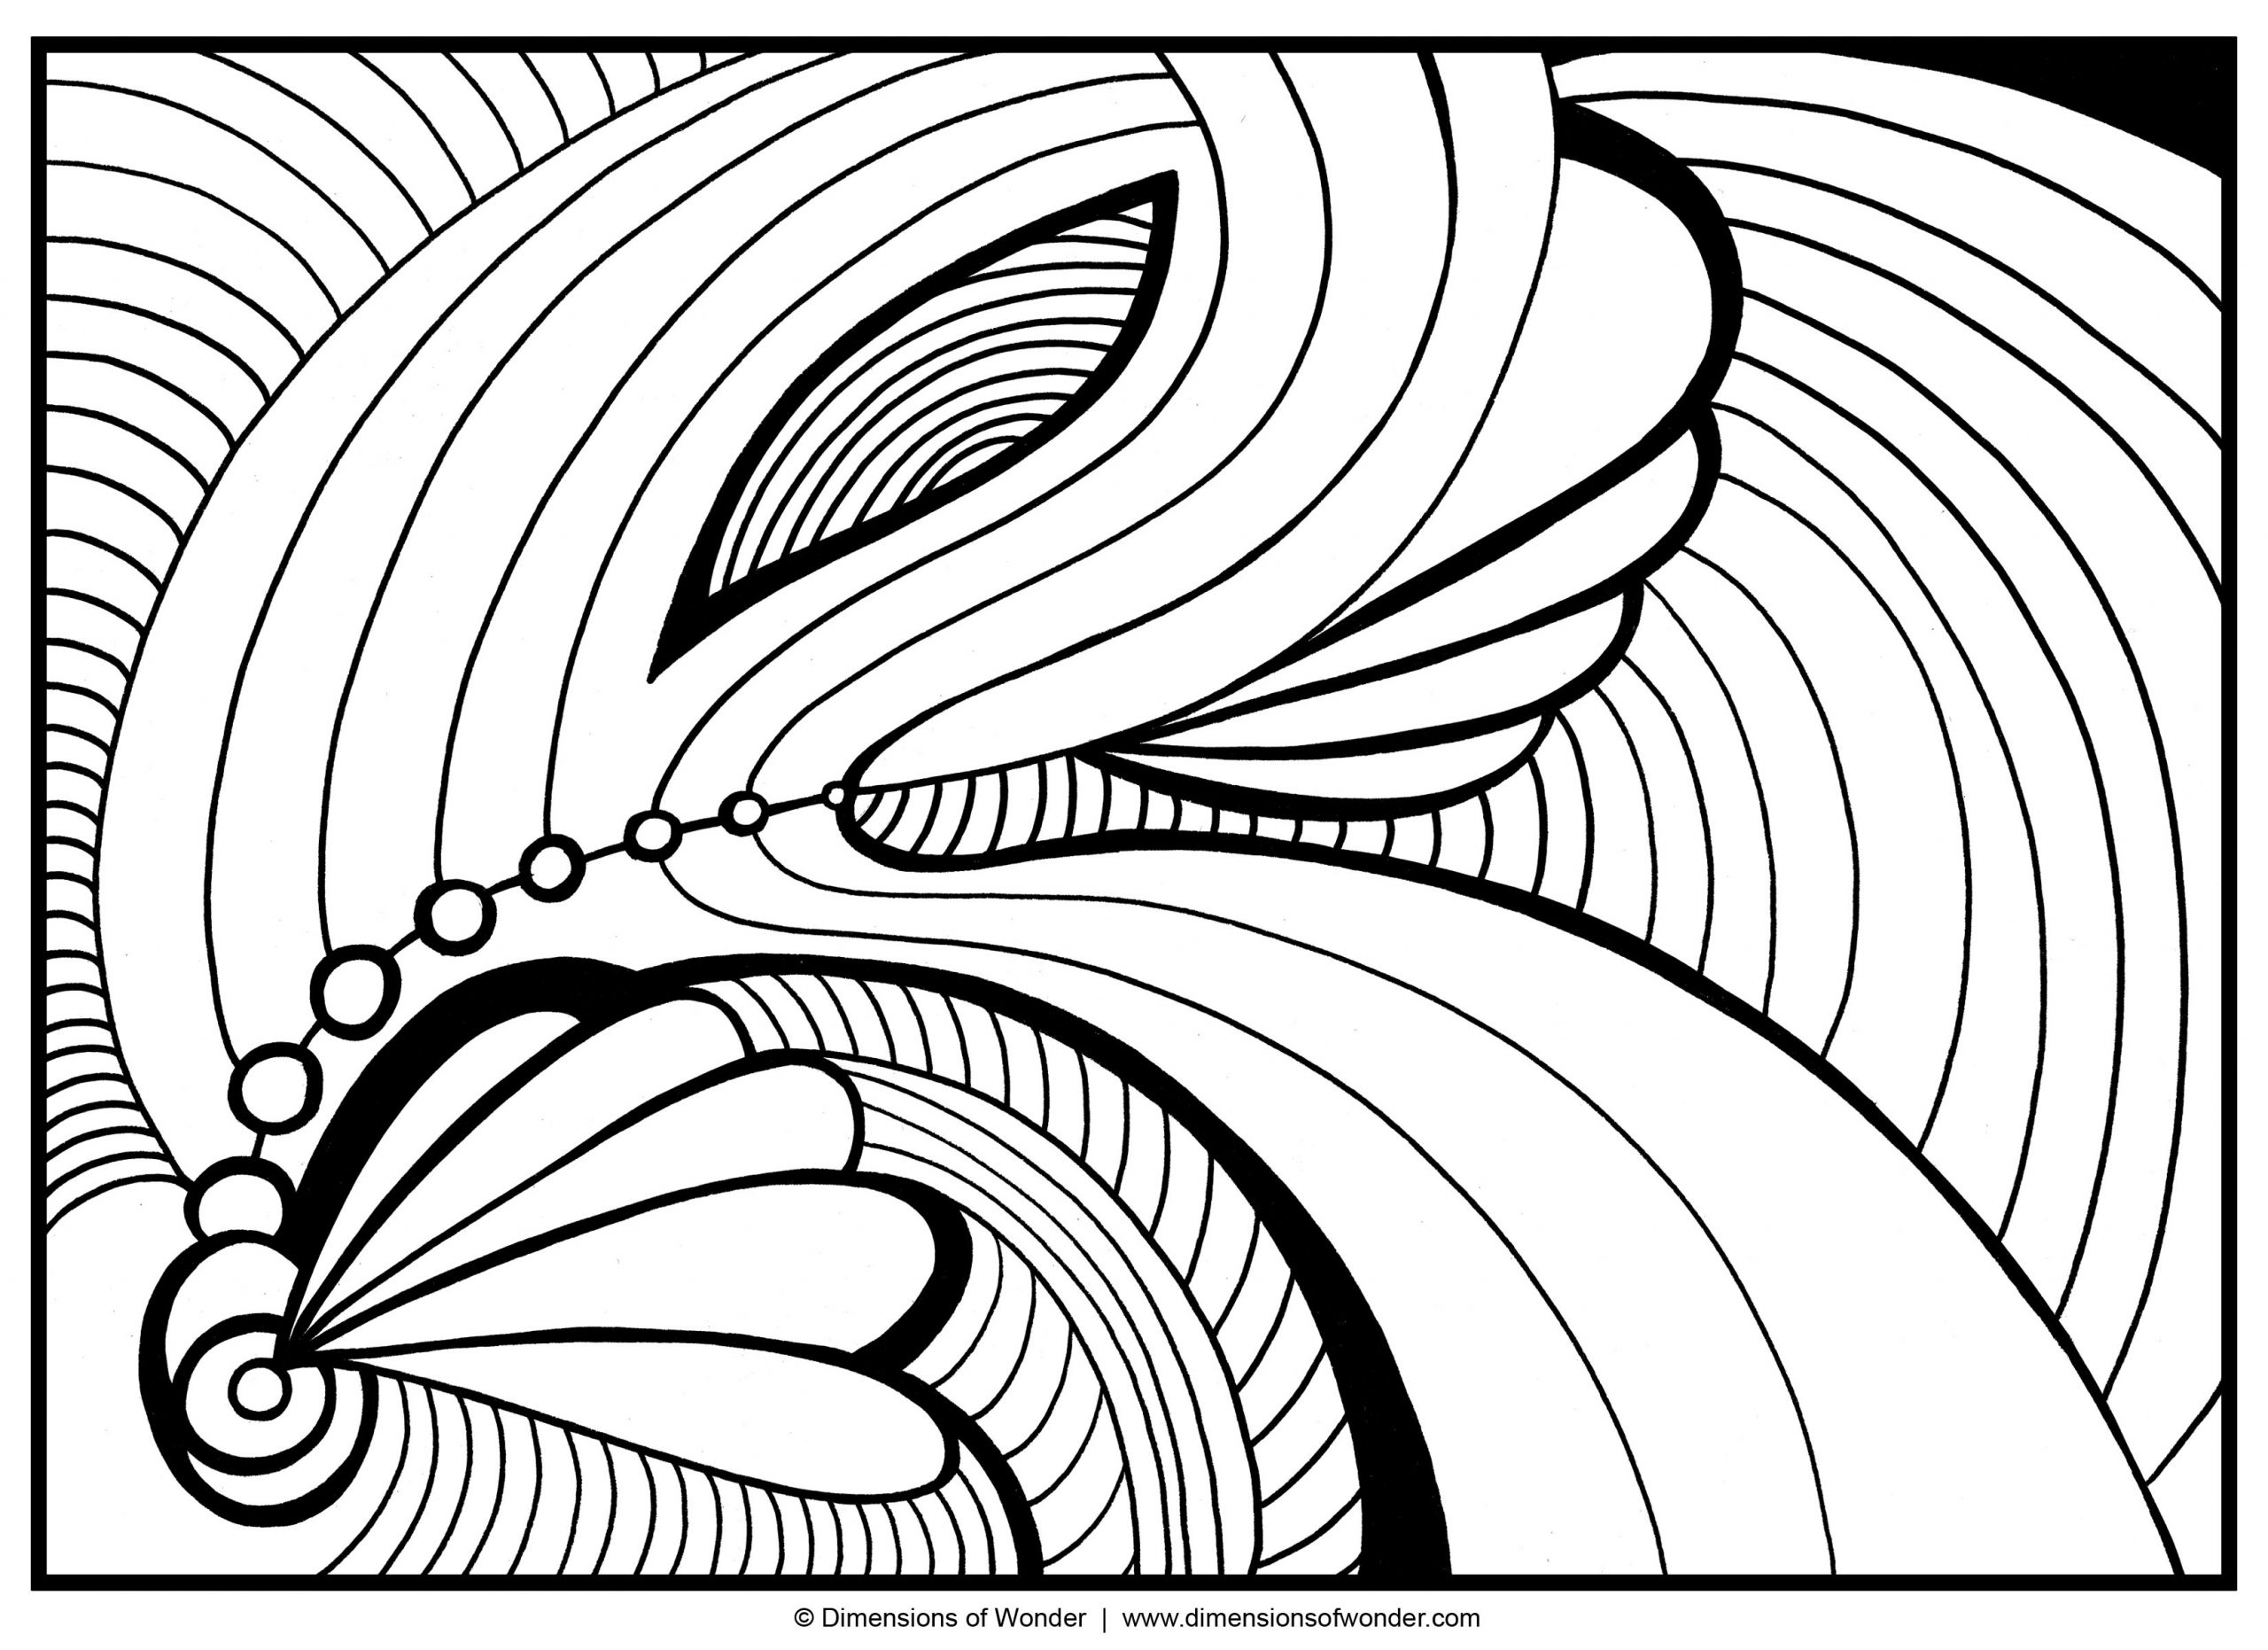 Hard Coloring Pages For Boys
 Hard Coloring Pages For Boys at GetColorings